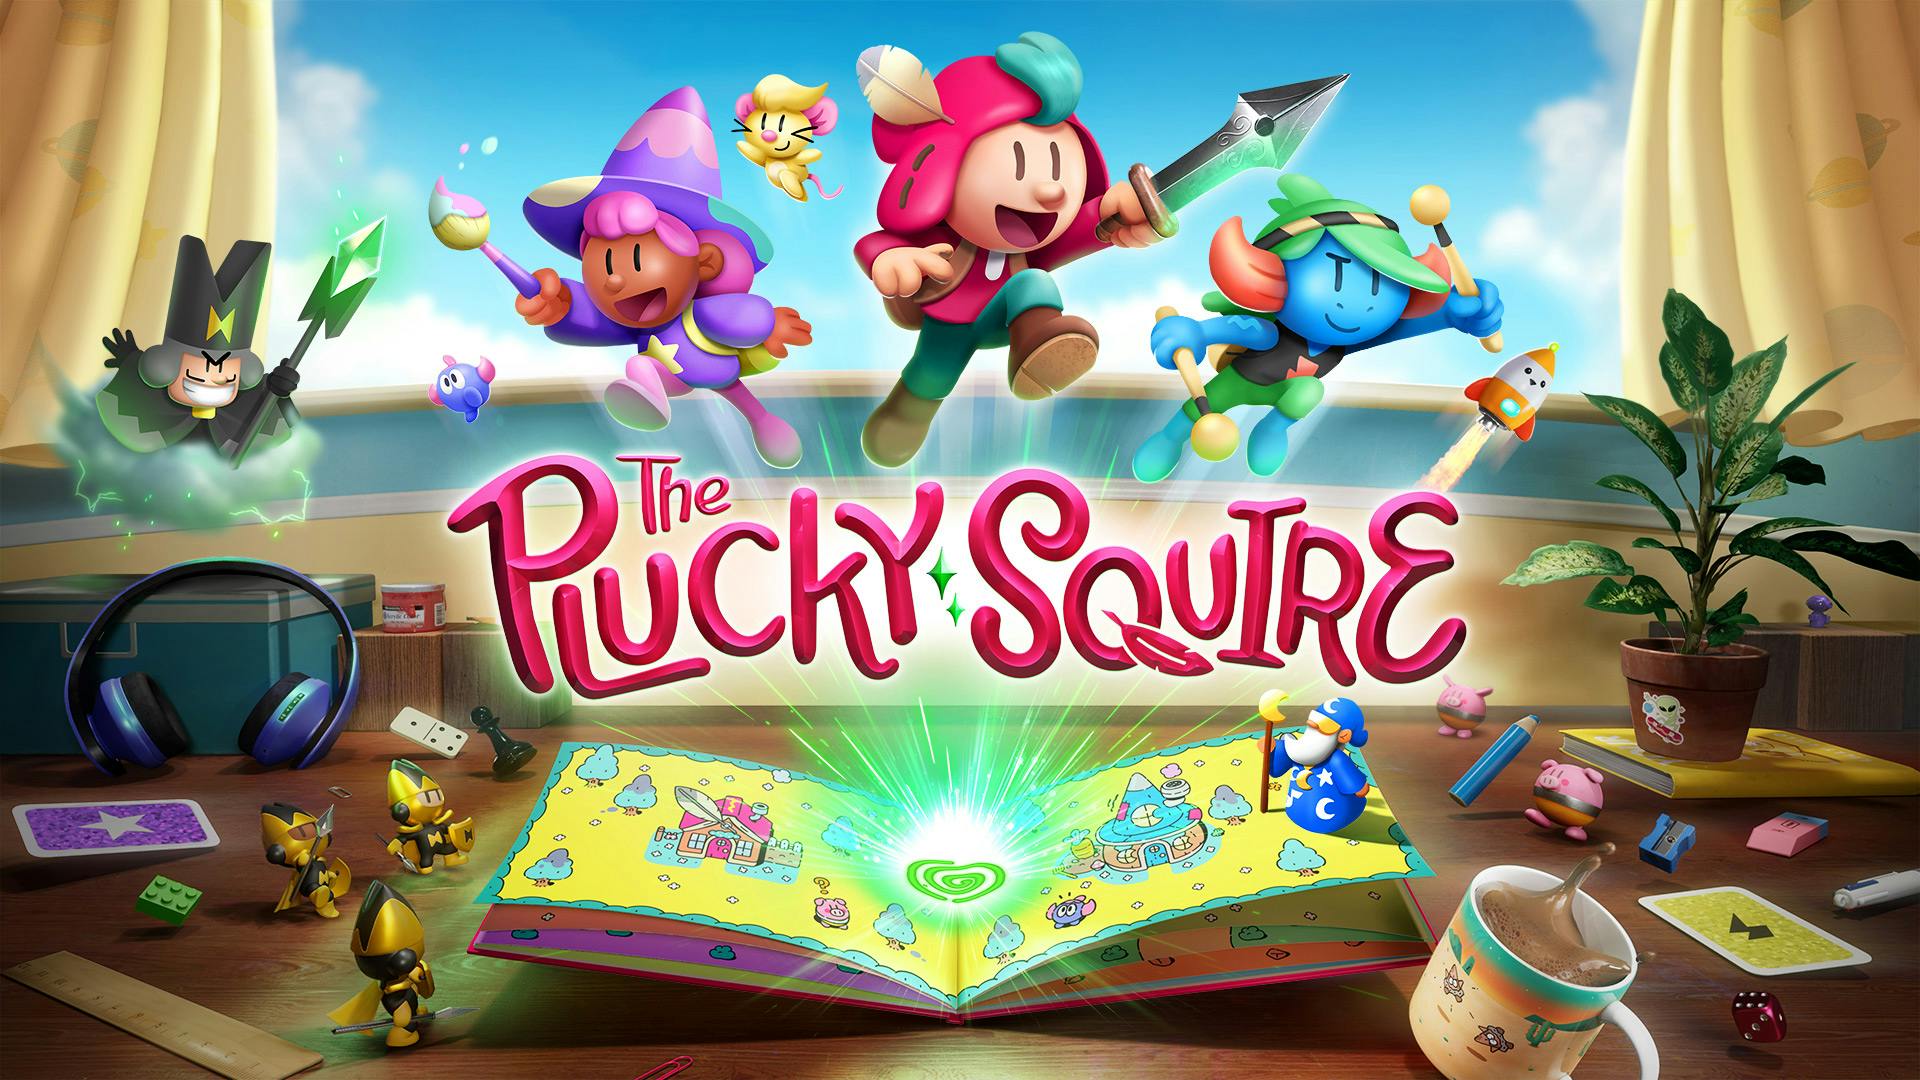 The Plucky Squire - Key Art